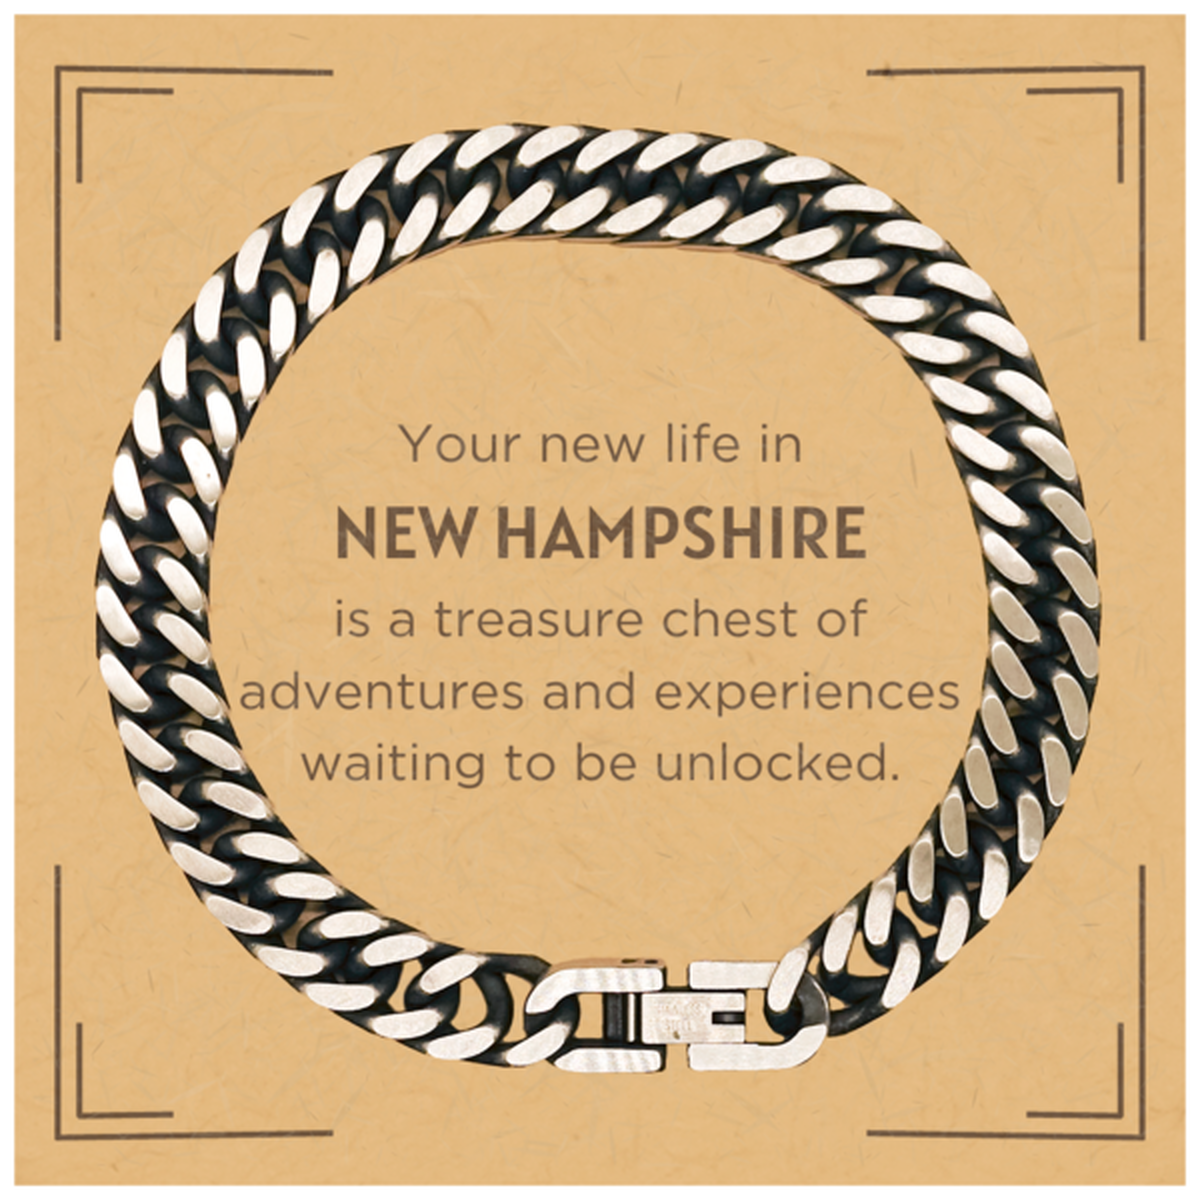 Moving to New Hampshire Gifts, Your new life in New Hampshire, Long Distance New Hampshire Christmas Cuban Link Chain Bracelet For Men, Women, Friends, Coworkers